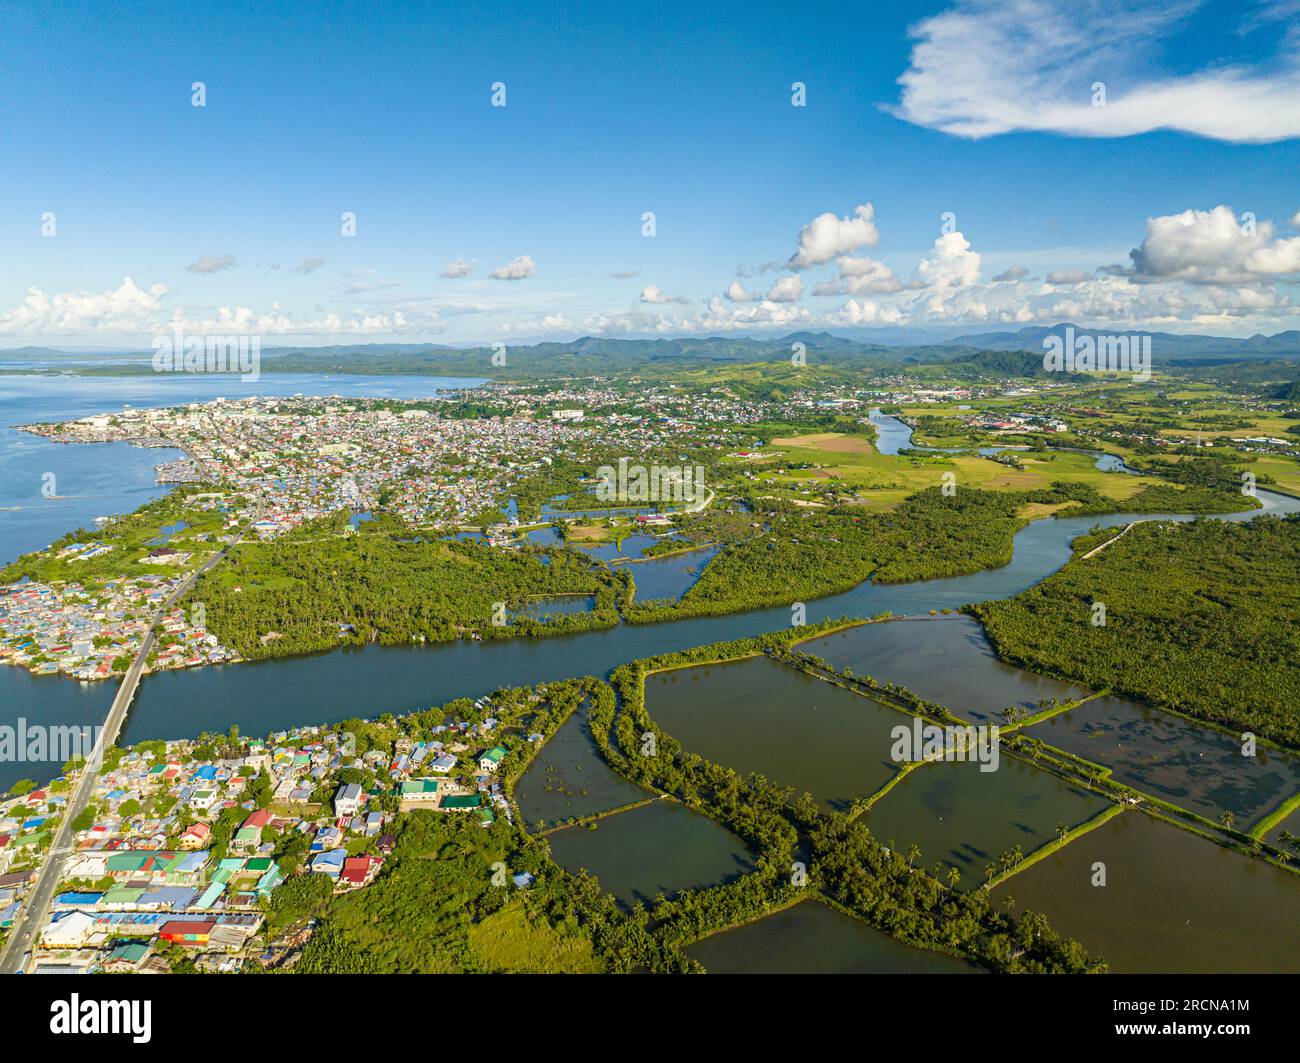 Air survey of beautiful Coastal City residential area and rainforest with river. Surigao, Philippines. Mindanao. Stock Photo